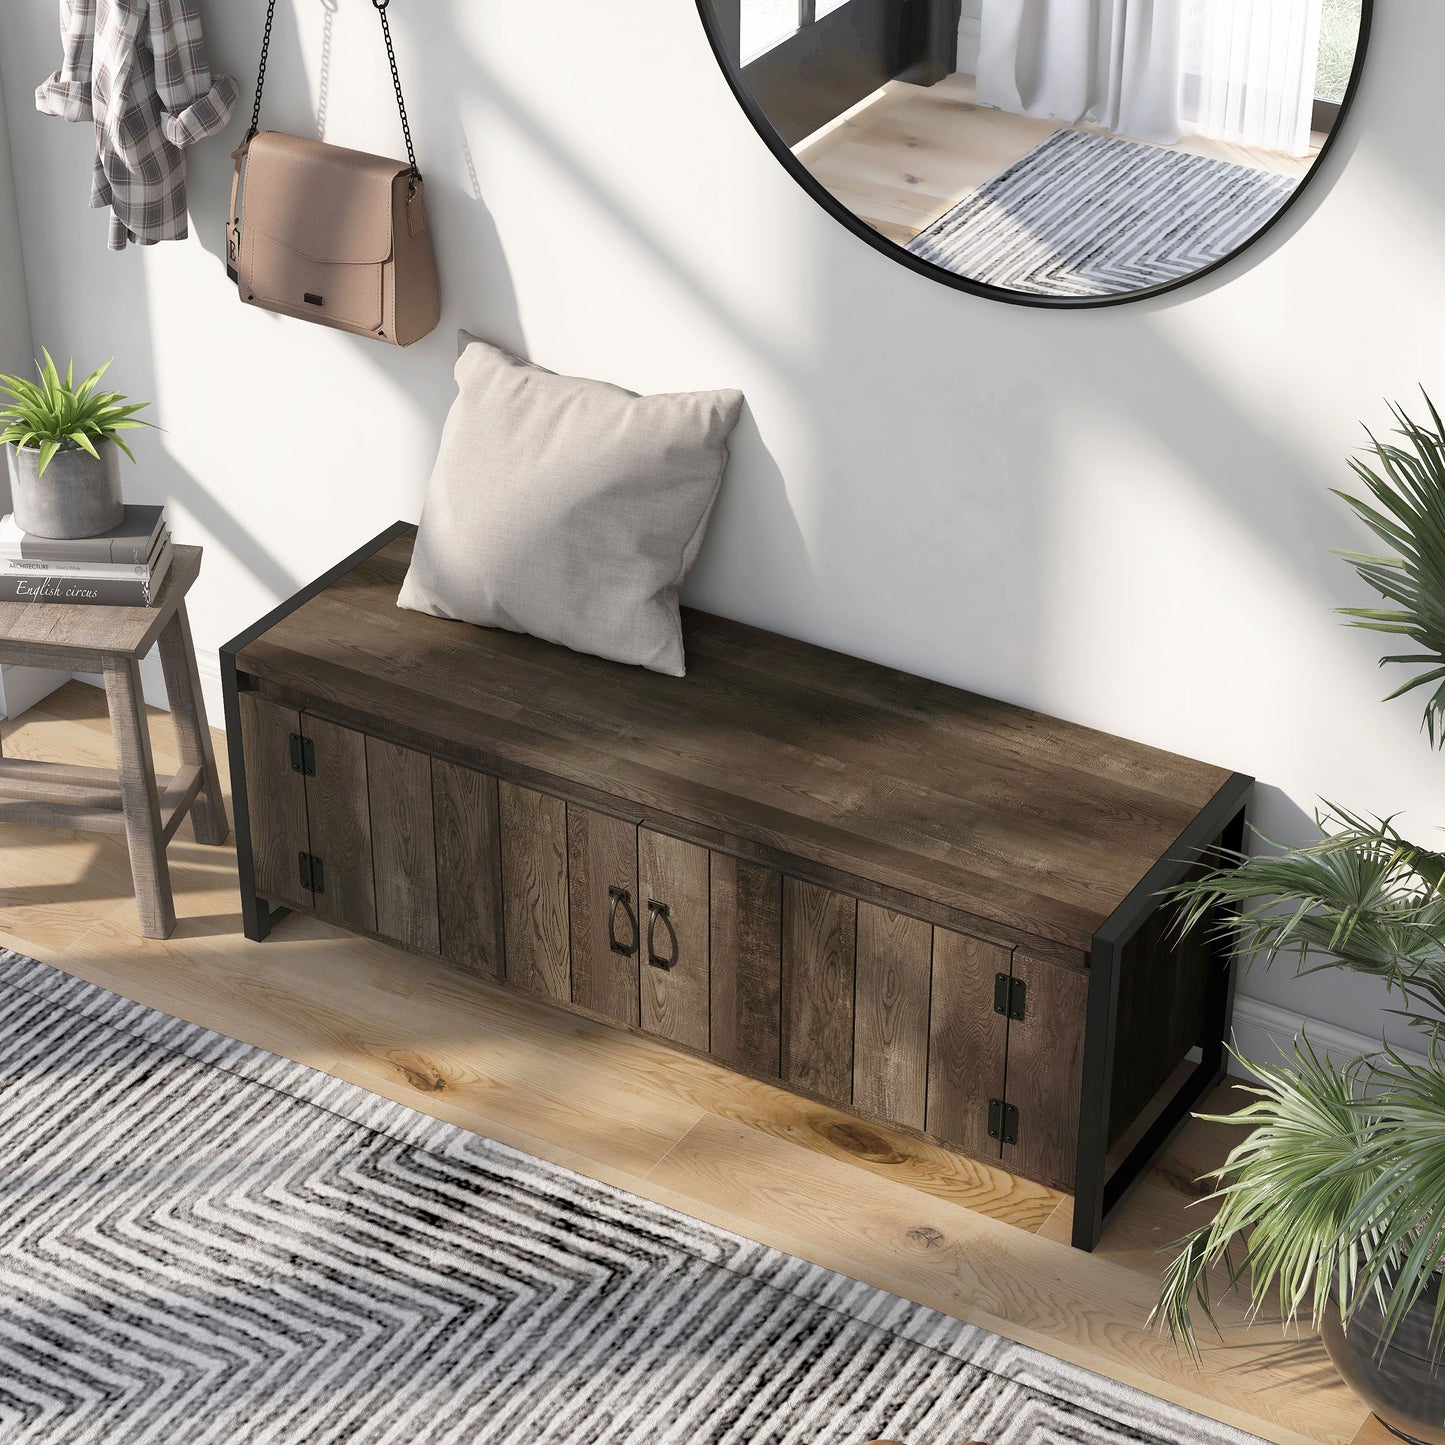 Left angled bird's eye view of a industrial reclaimed oak two-door storage bench in an entryway with accessories